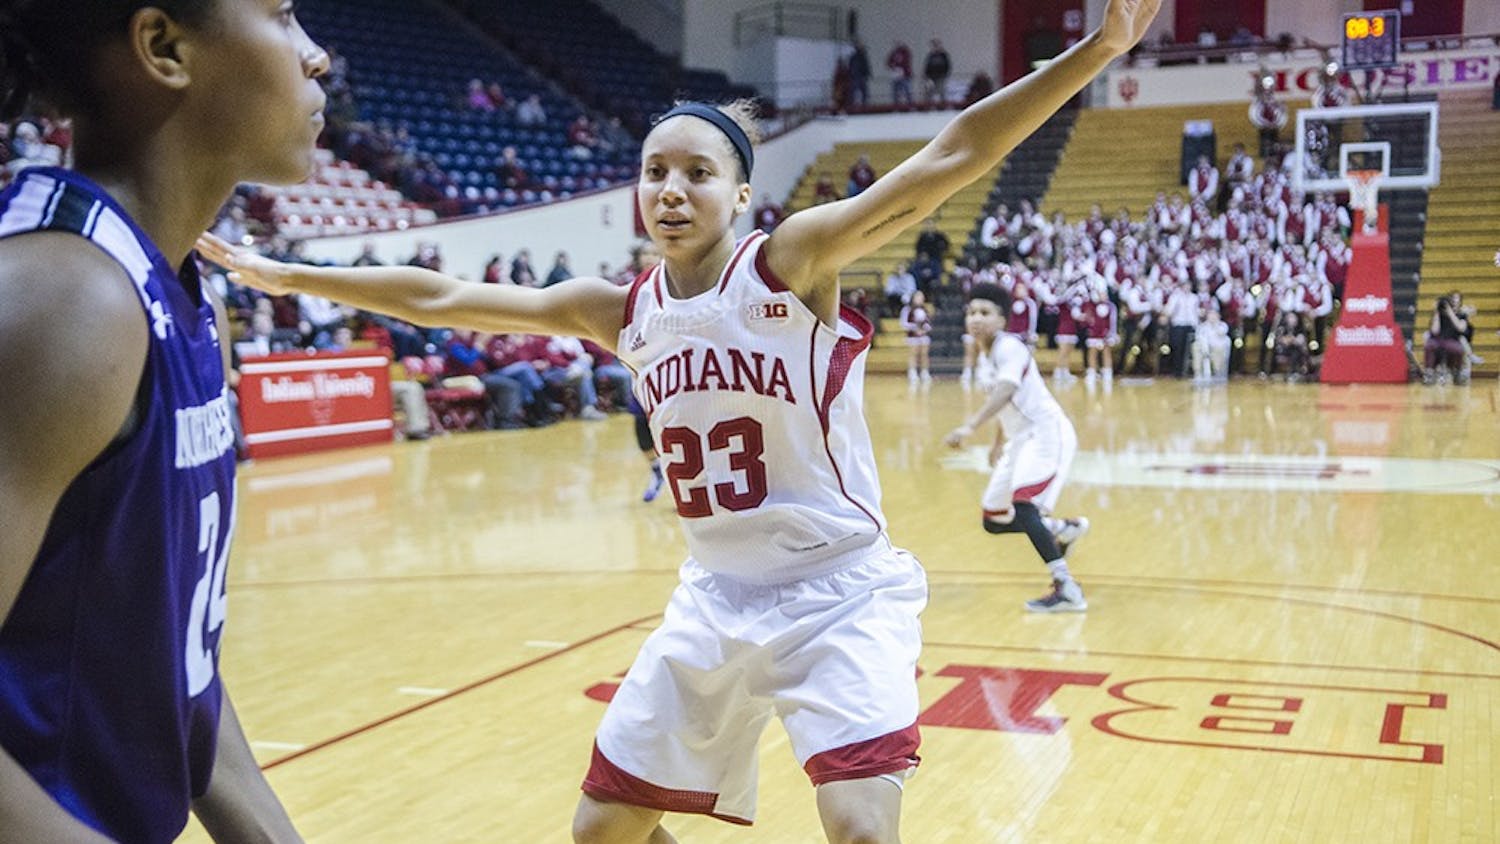 Sophomore guard Alexis Gassion disrupts an inbound pass durning the last two minutes of the IU’s game against Northwestern at Assembly Hall on Thursday. The game had 11 lead changes and the Hoosiers lost 75-69.